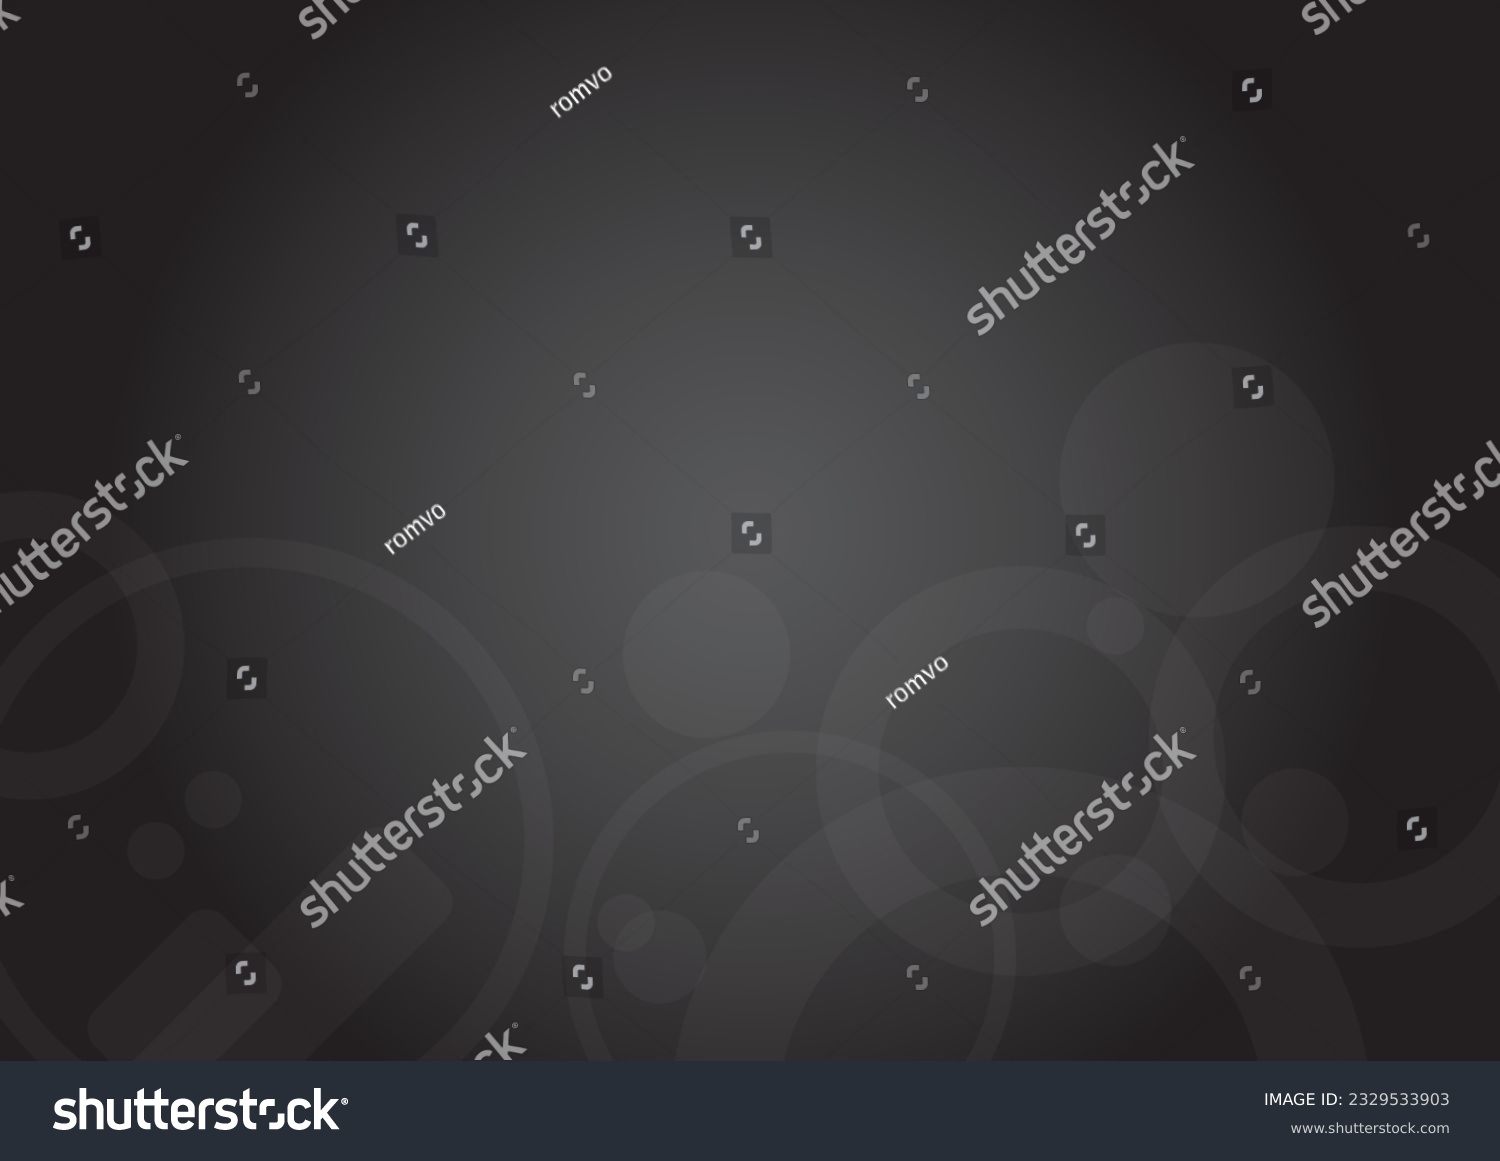 SVG of Vector web slider dark black gradient background. It is very convenient to use as backdrop in sliders for presenting goods and services, due to the size of the svg, which is only a few kilobytes svg